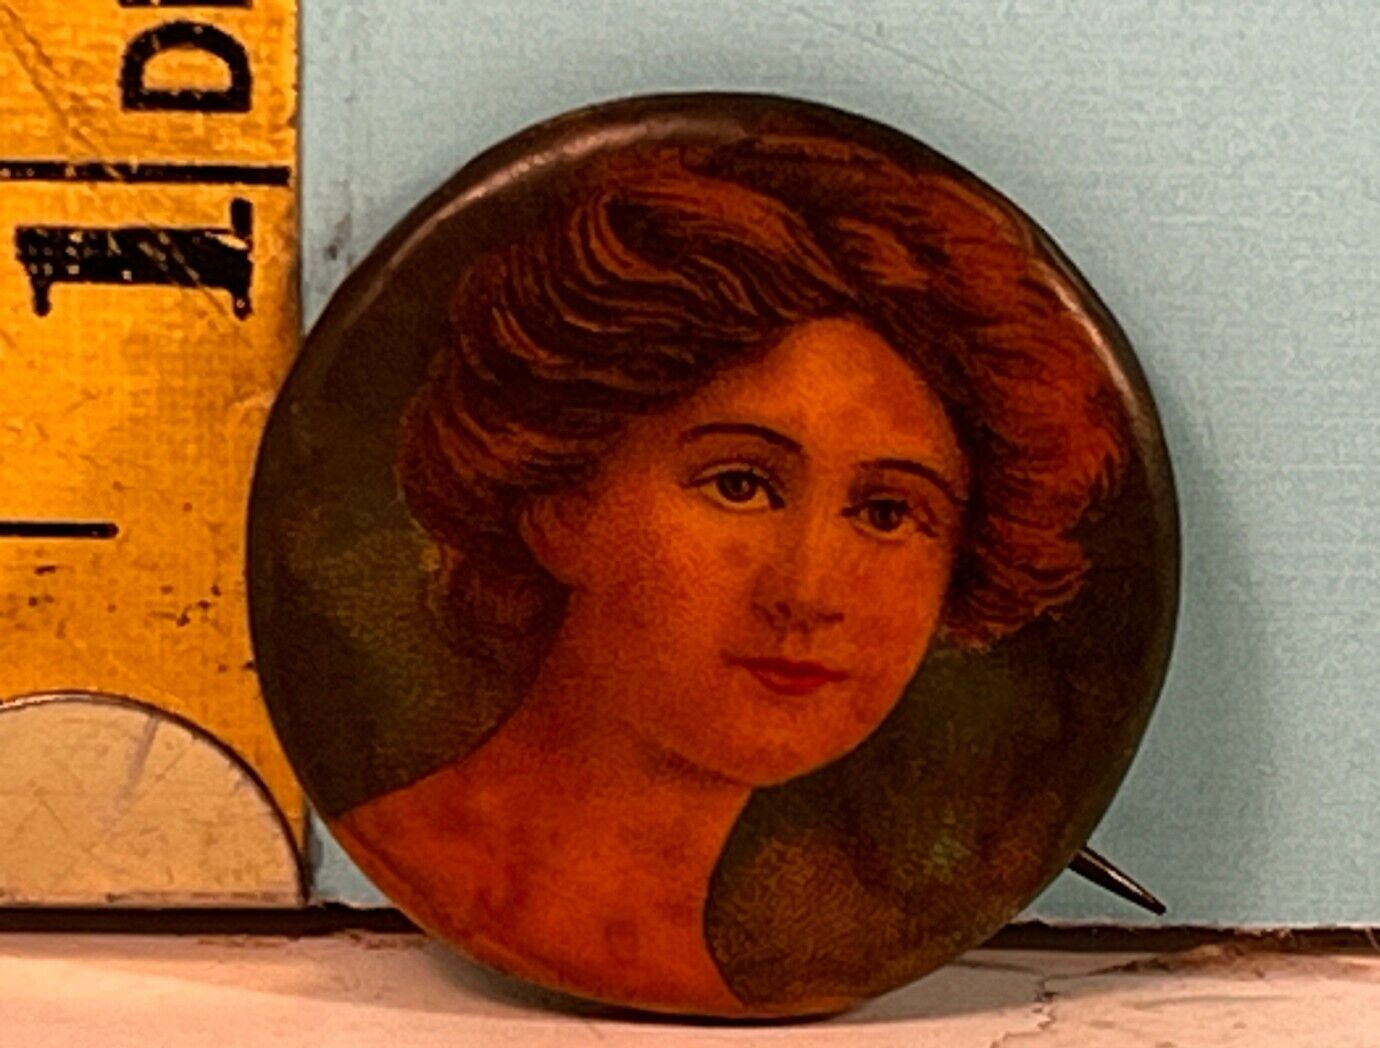 Vintage lovely period Girl pinback button.